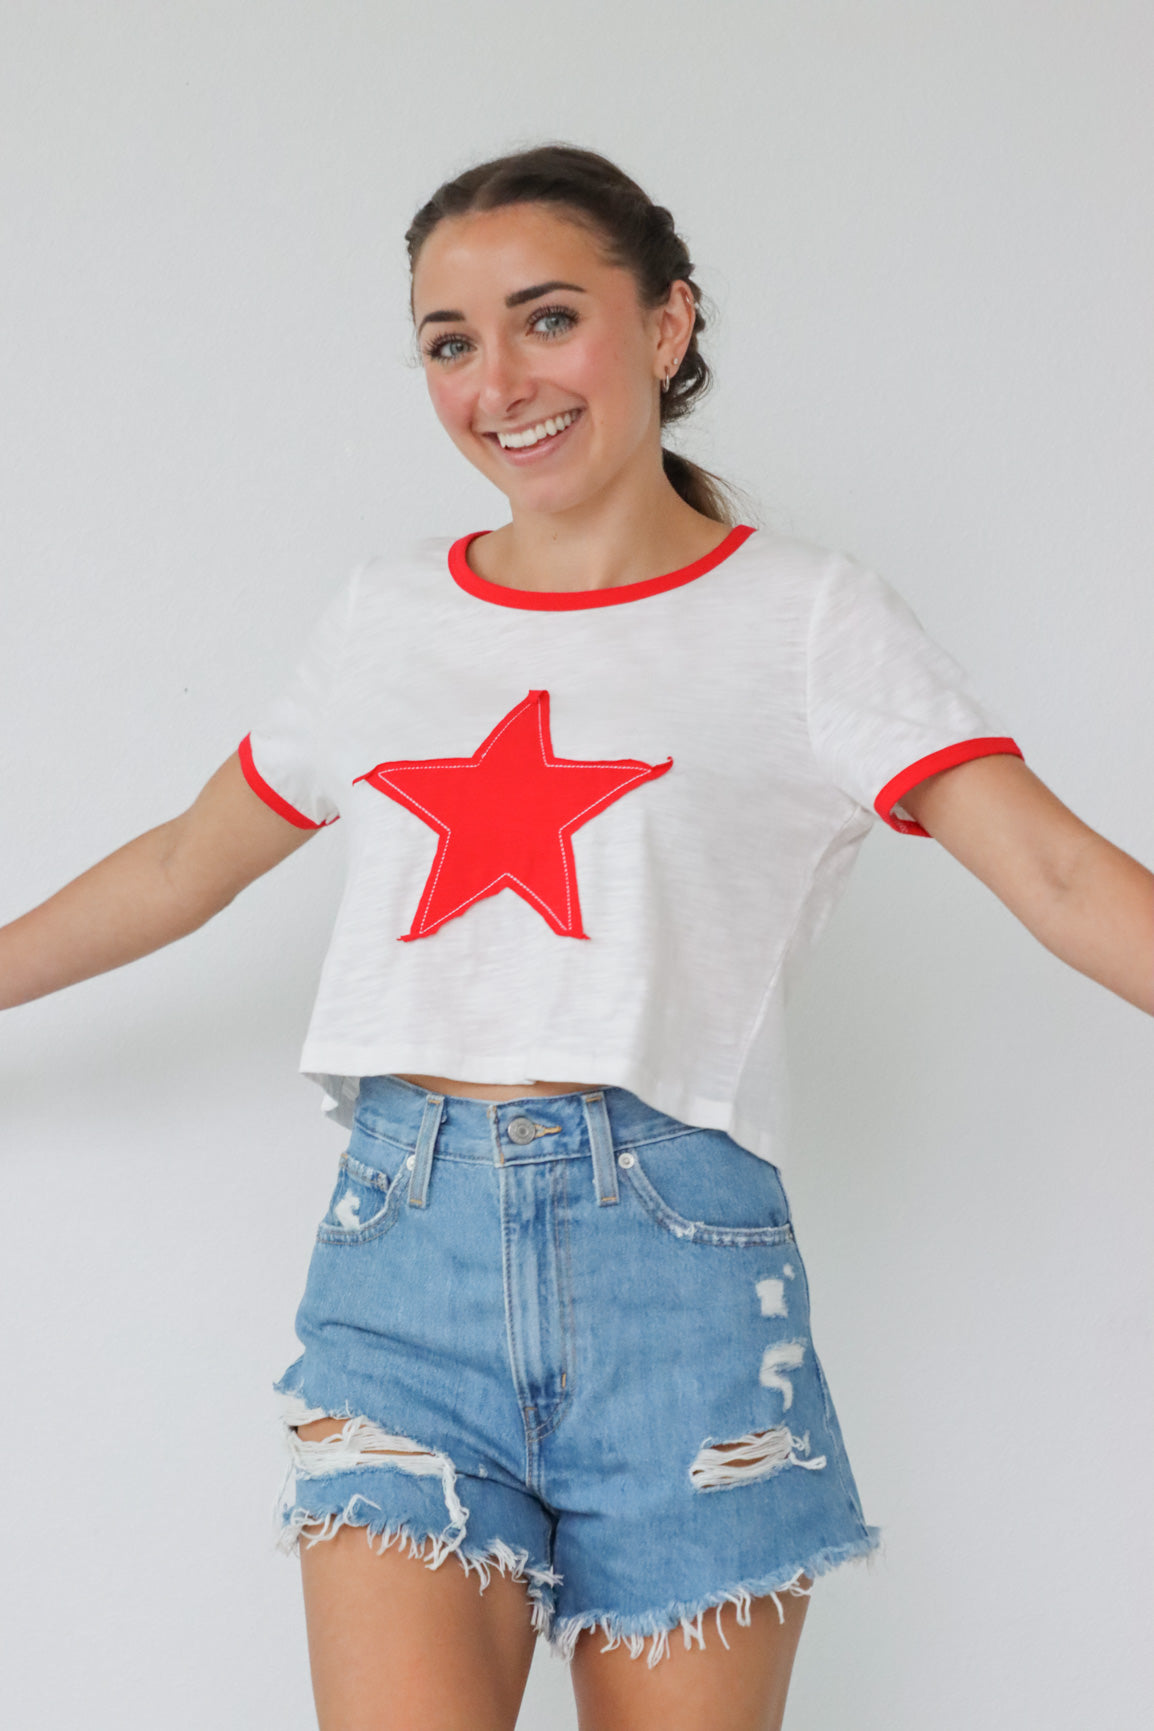 girl wearing white t-shirt with red embroidered heart detailing